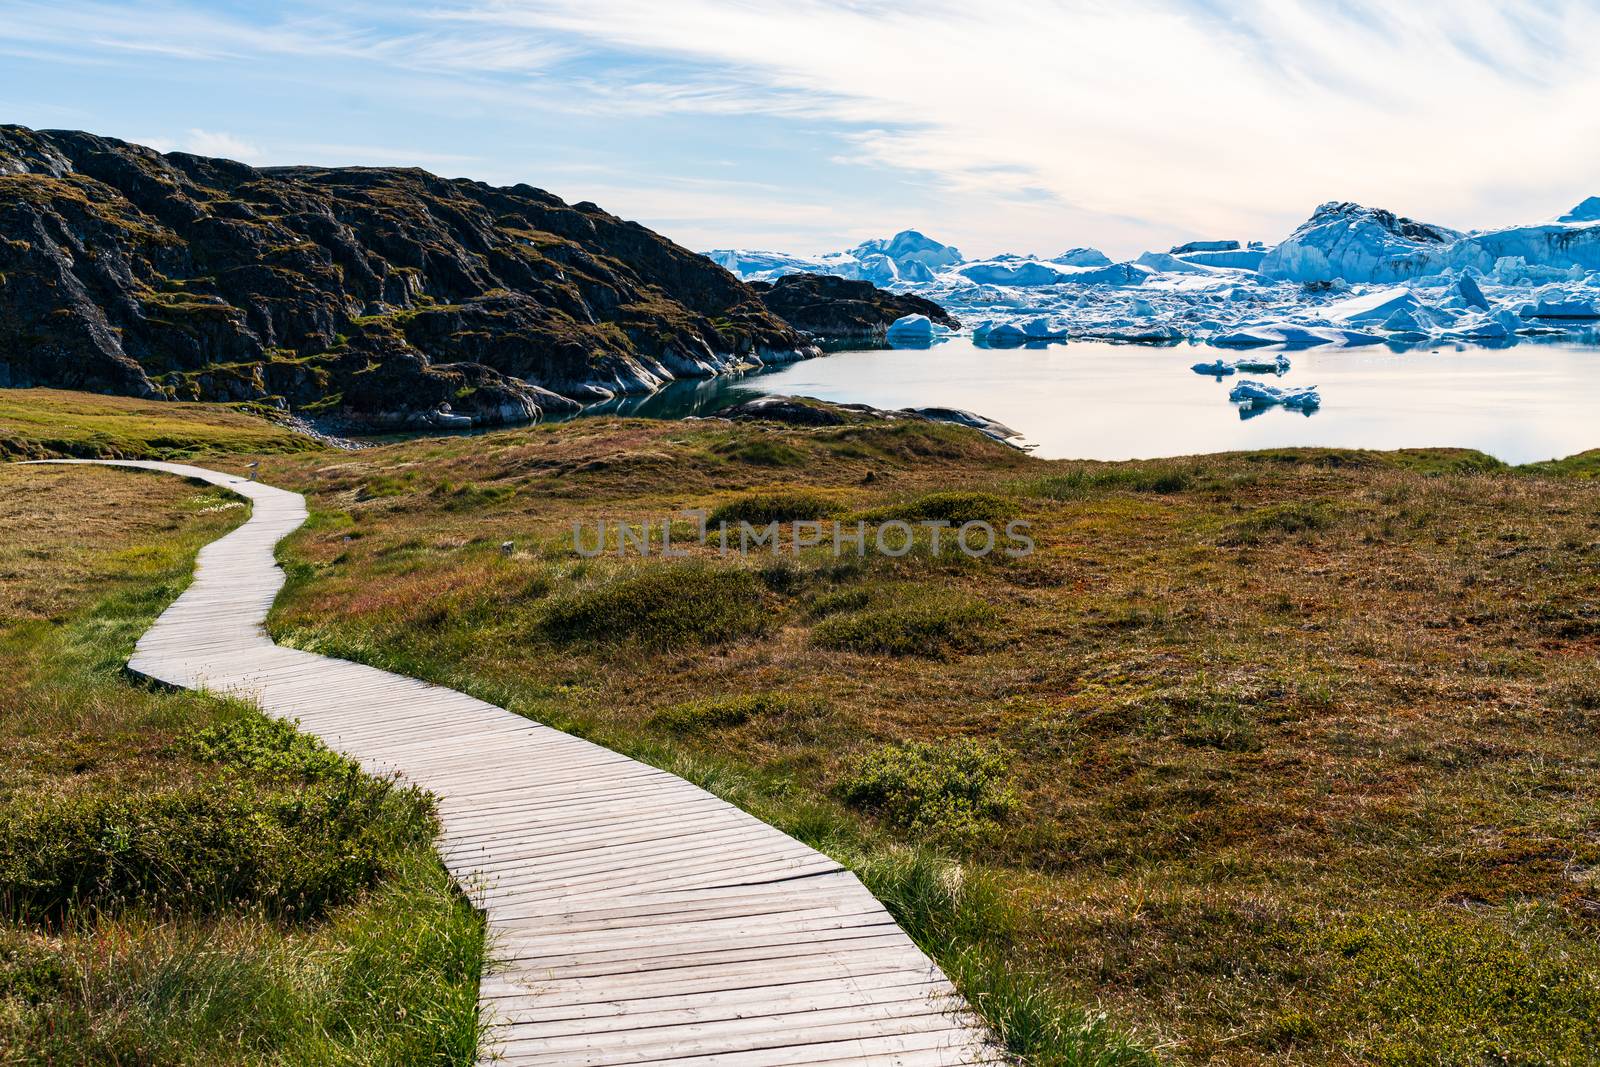 Hiking trail path in Greenland arctic nature landscape with icebergs in Ilulissat icefjord by Maridav